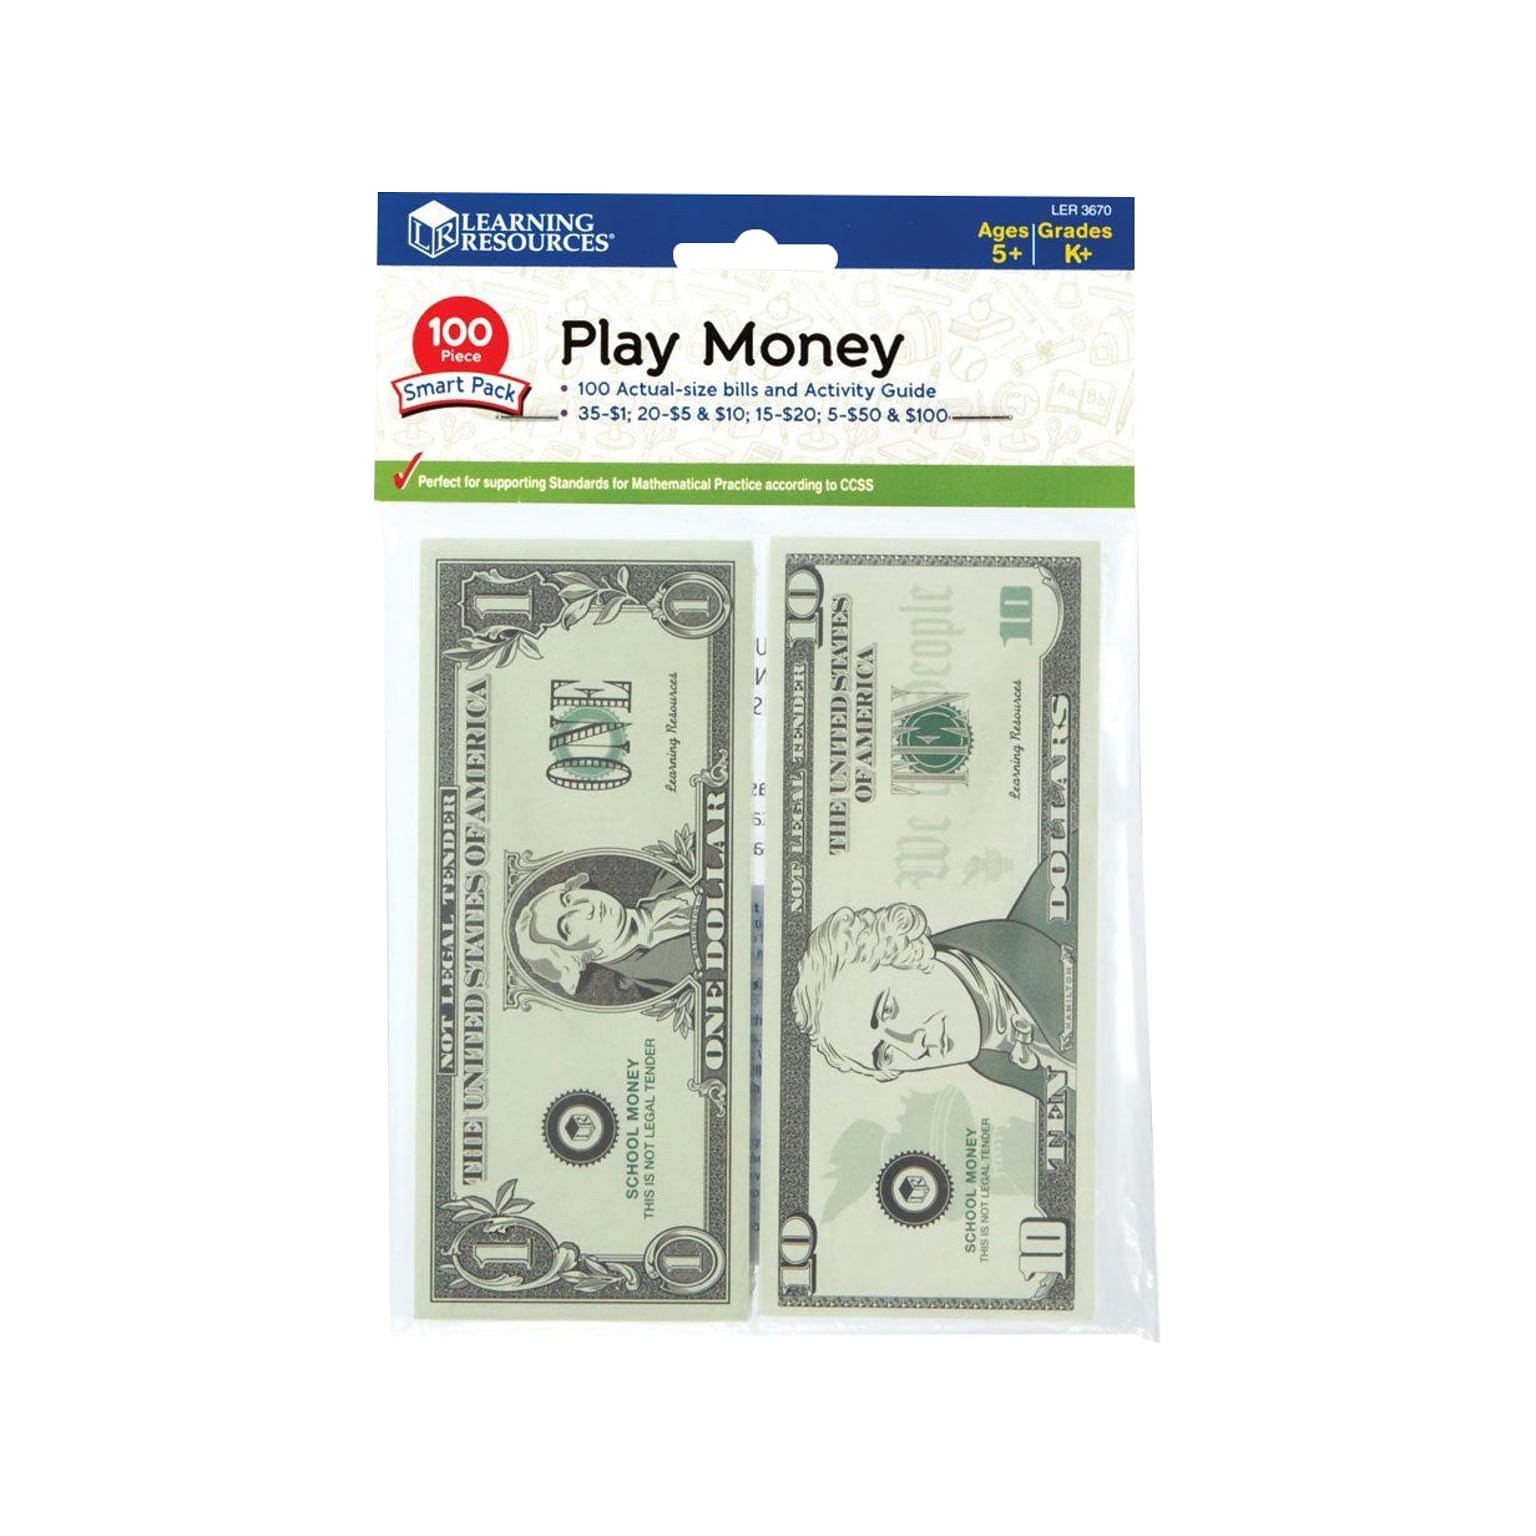 Learning Resources Play Money Smart Pack, Green, 100/Pack (LER 3670)